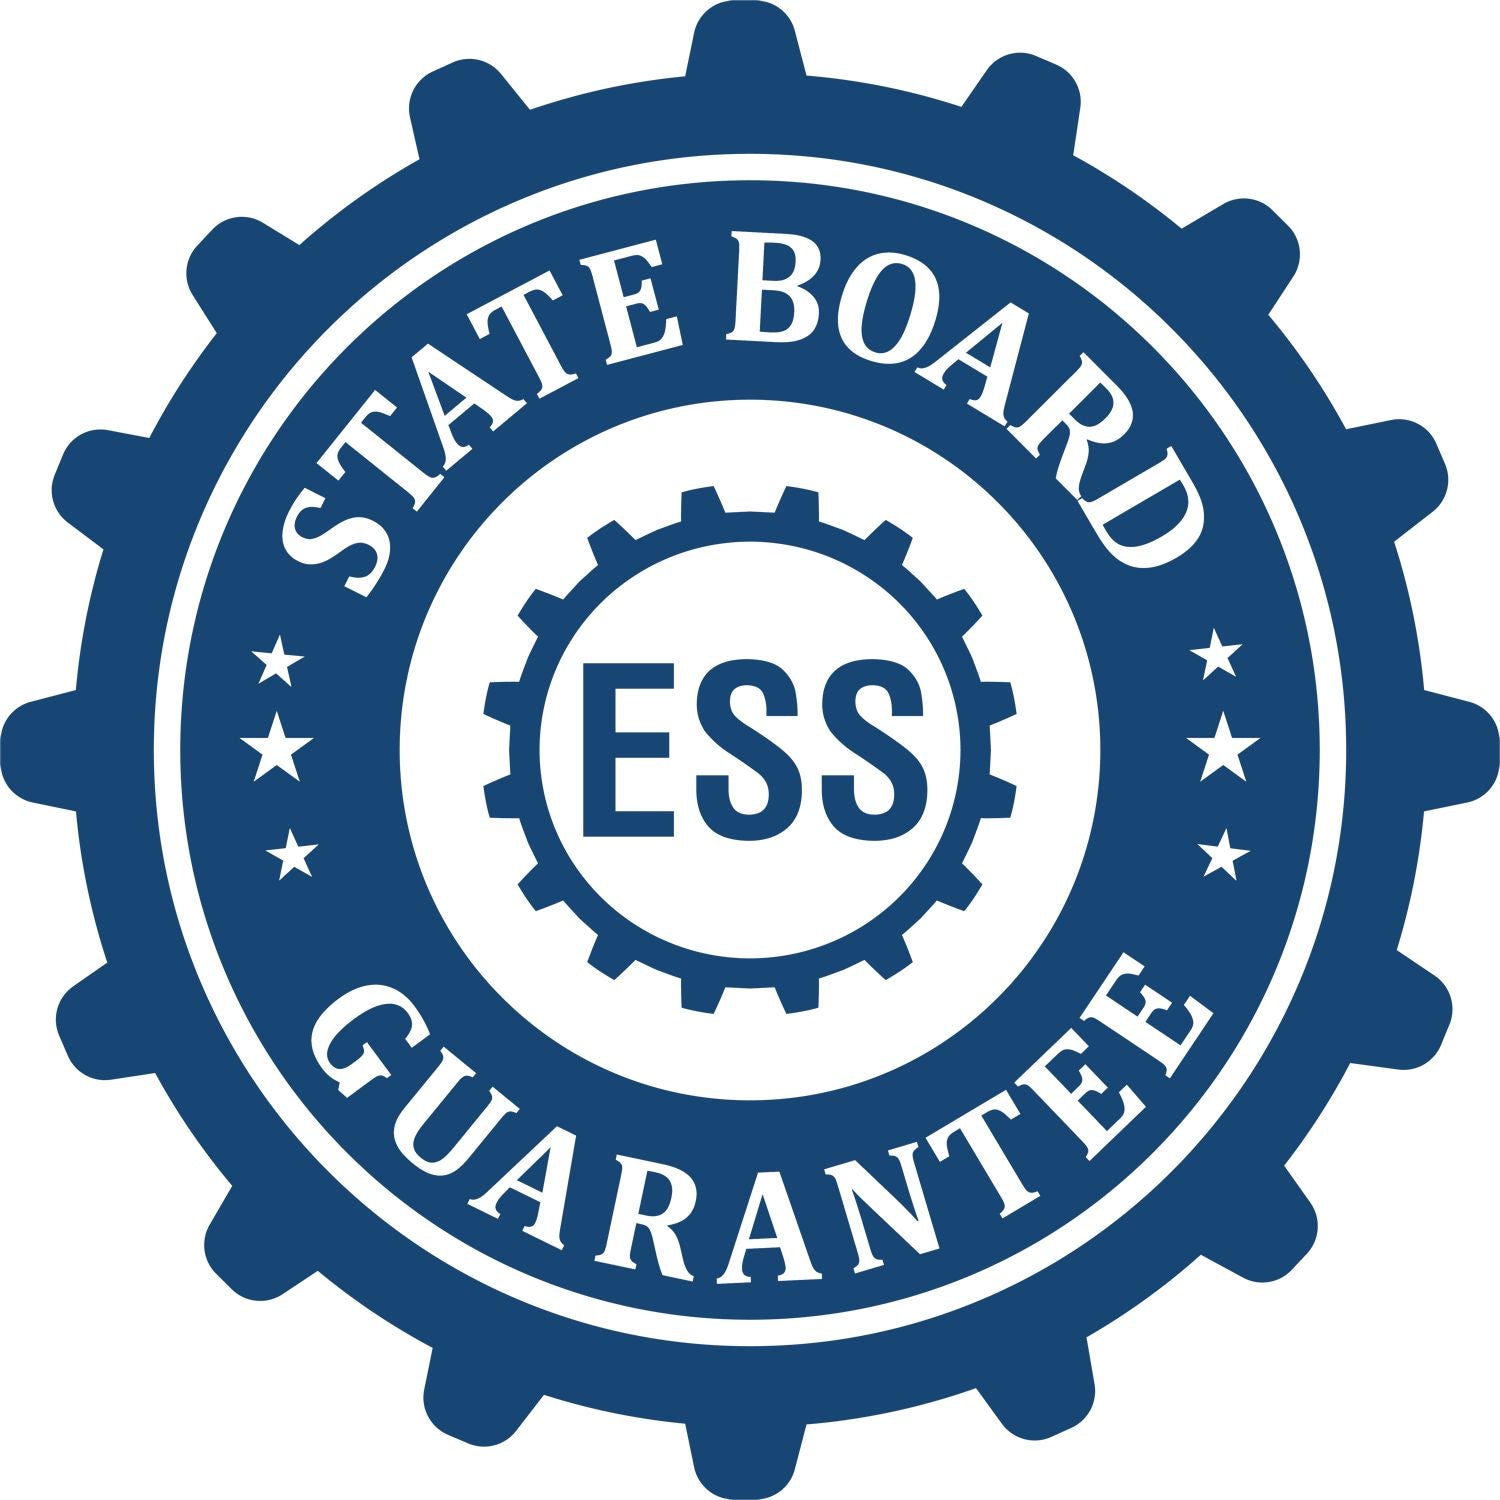 An emblem in a gear shape illustrating a state board guarantee for the Premium MaxLight Pre-Inked South Dakota Engineering Stamp product.